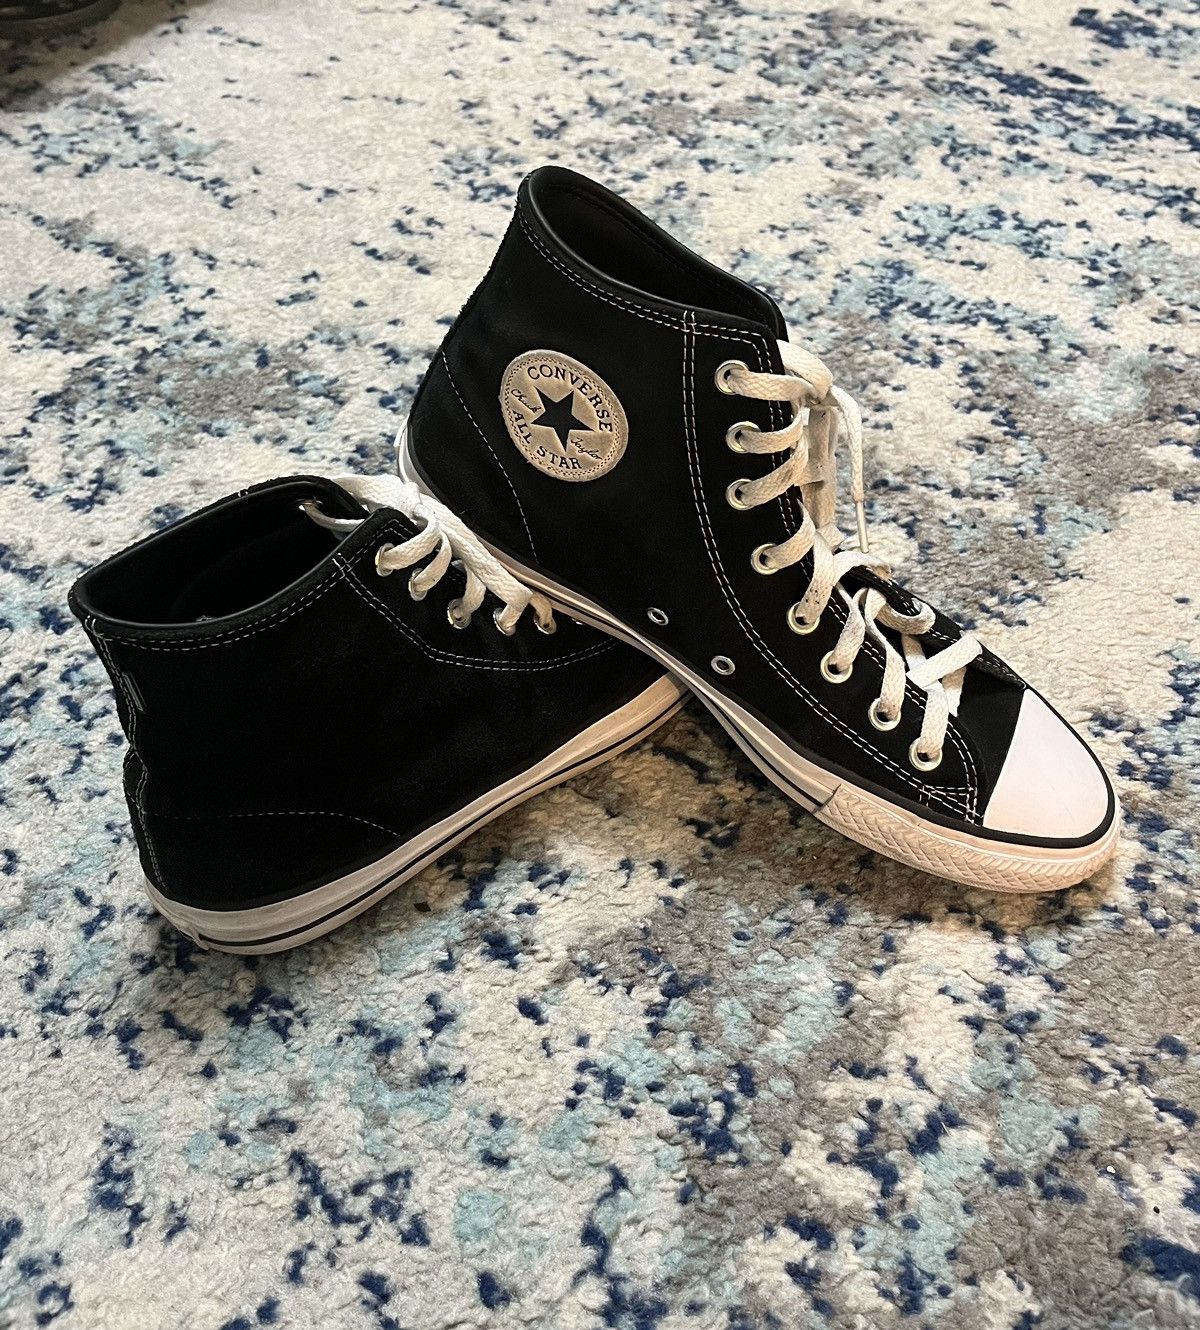 Vintage CONS Chuck Taylor All Star Pro | Grailed